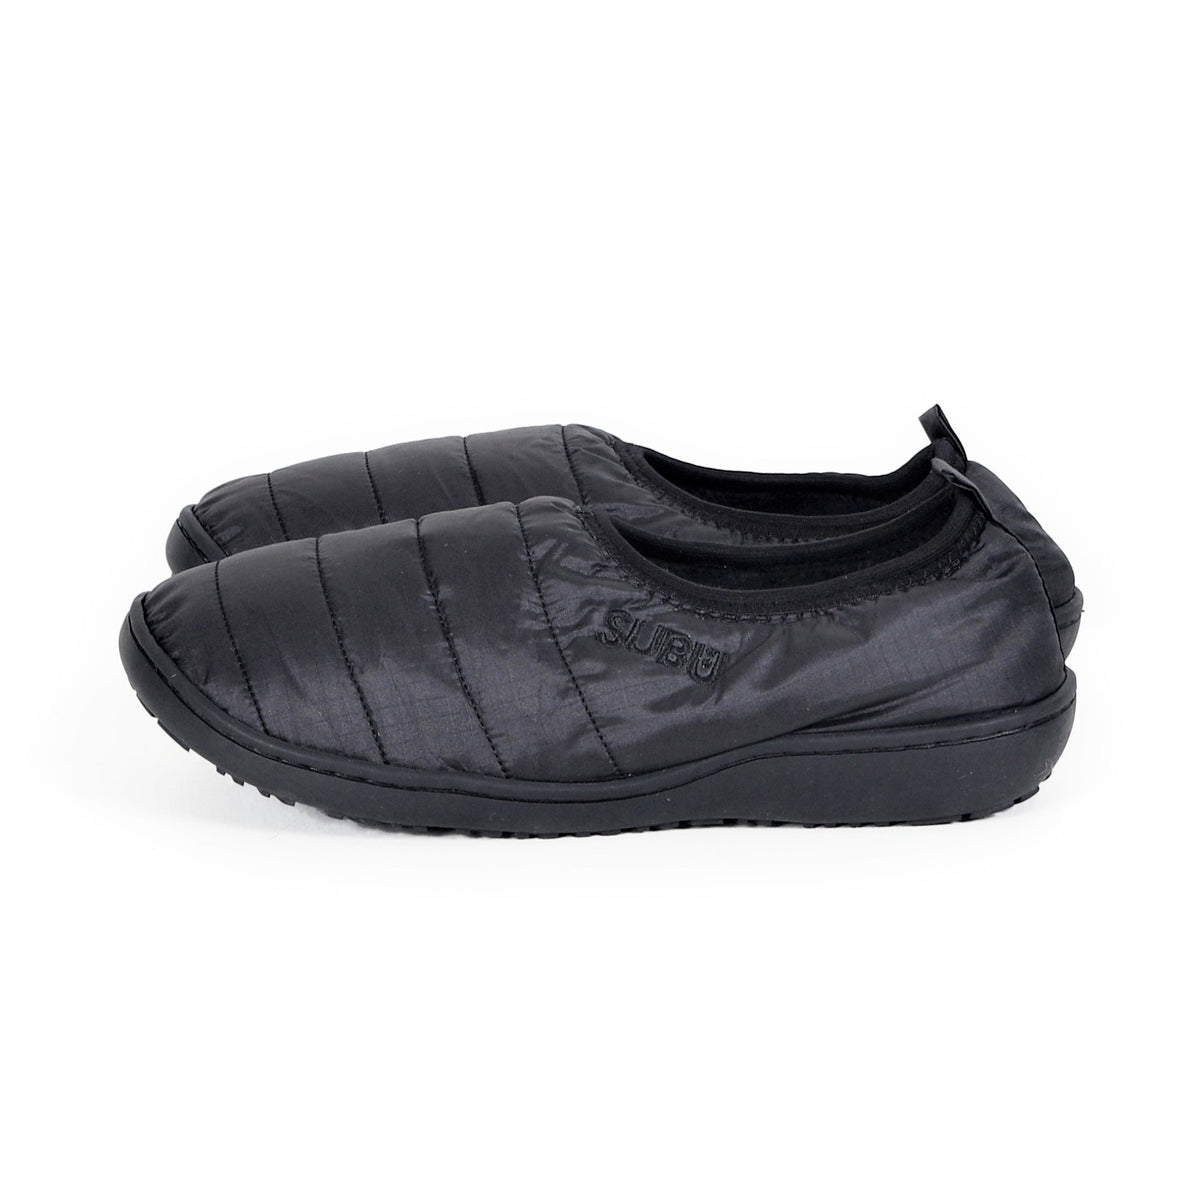 SUBU, Packable Slippers Gloss Black, Size, 3, Slippers,